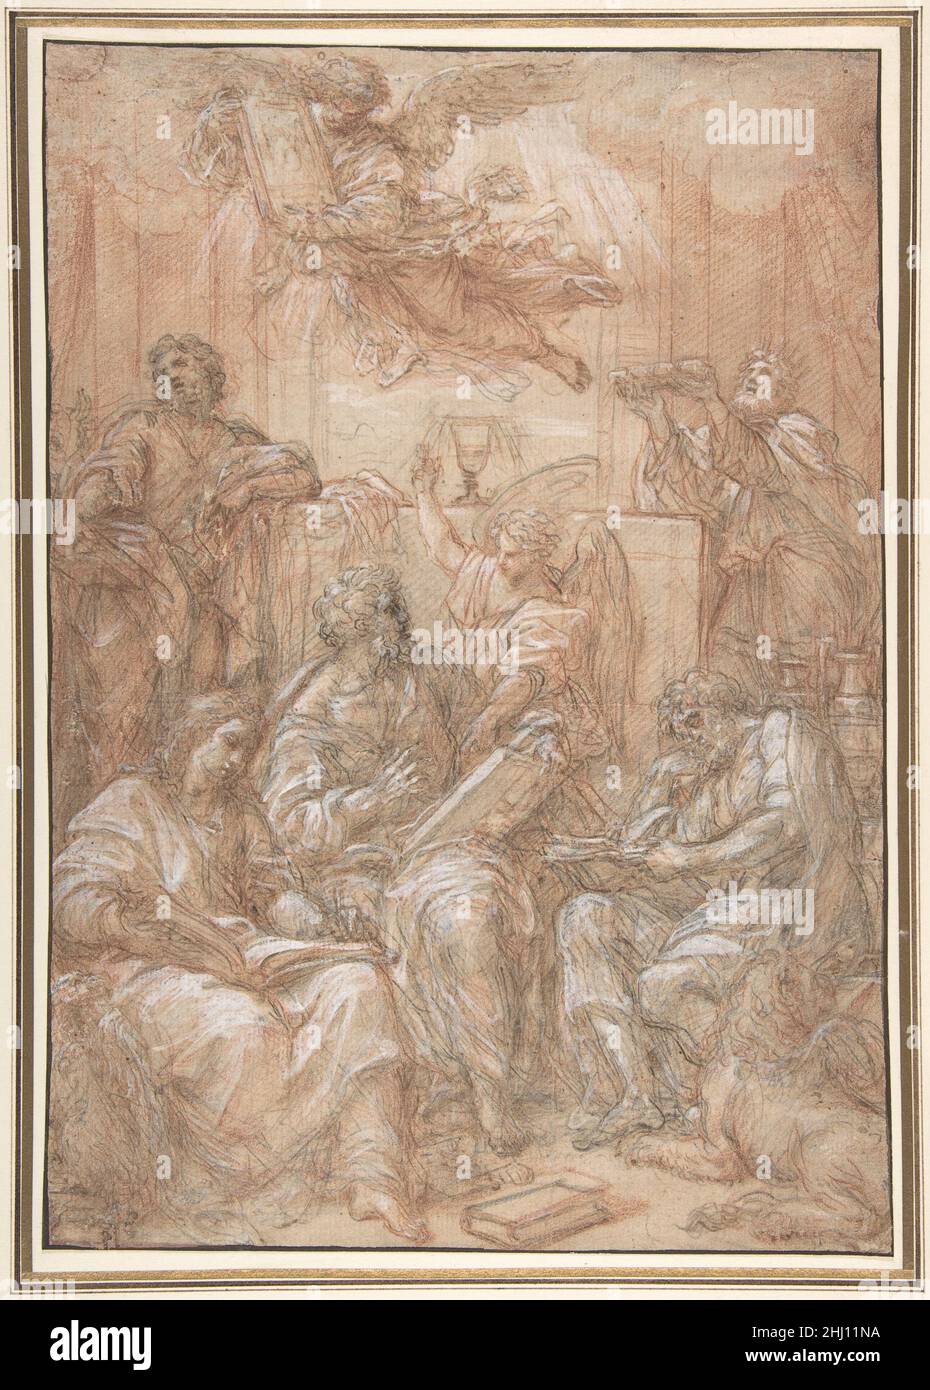 Allegory of the Old and New Dispensations 1700–8 Carlo Maratti Italian A late work by the prolific Maratti, this drawing depicts a complex theological allegory. Gathered around an altar on which rests a chalice containing the Eucharistic wine are the four Evangelists, authors of the Gospels and representatives of the New Dispensation. In the background at the right is the king-priest Melchizedek making an offering while gazing upward at an angel holding a tablet that represents either the Pentateuch (the Hebrew Bible, or Five Books of Moses), or possibly the Tablets of the Law. This subsidiary Stock Photo